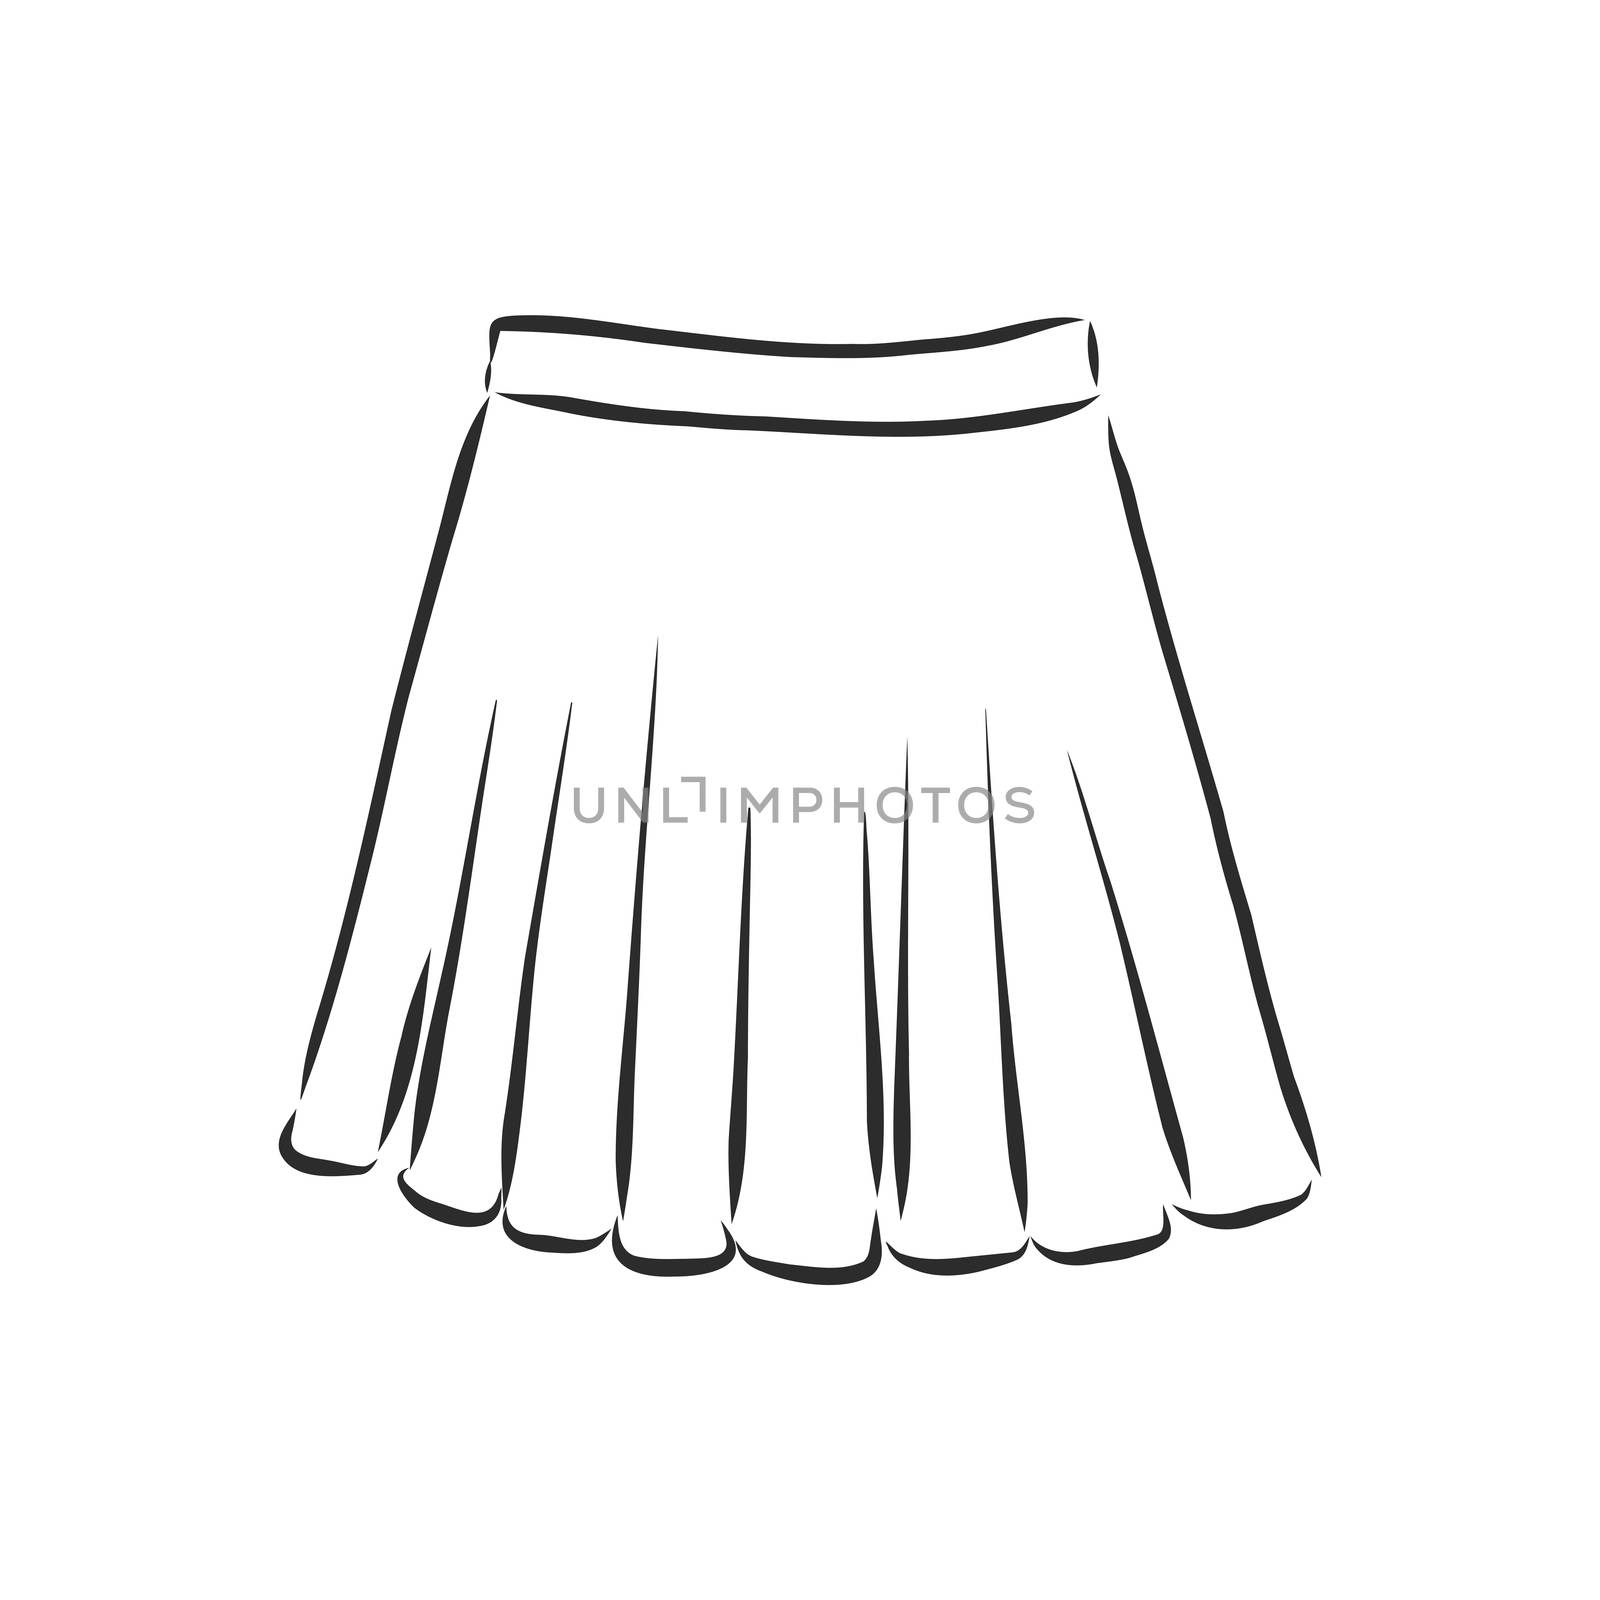 Vector illustration of skirts. Women's clothes